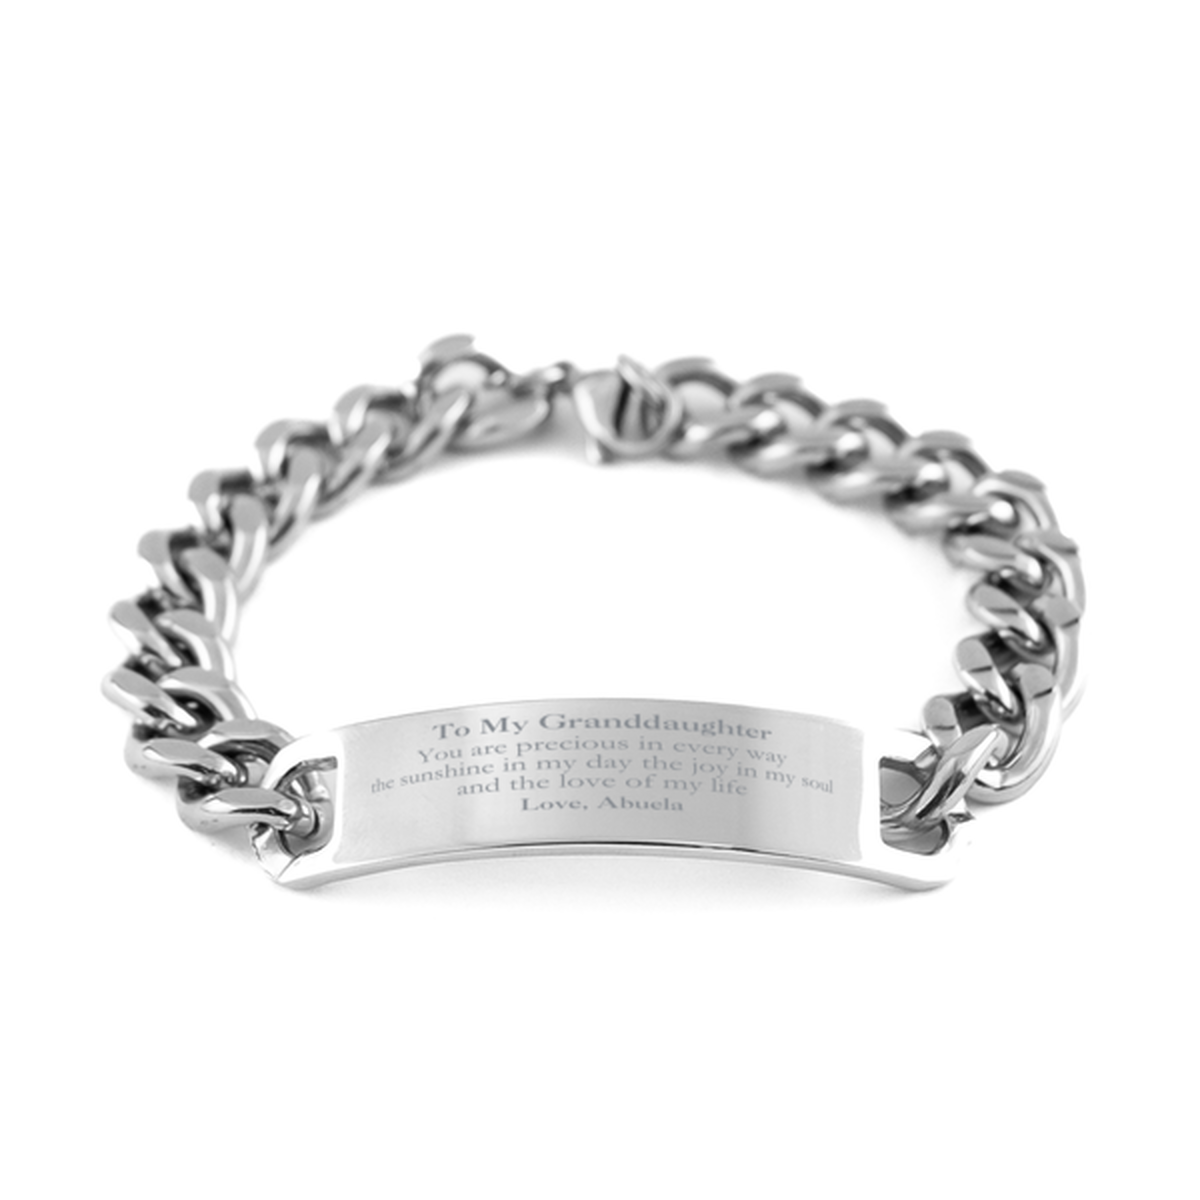 Graduation Gifts for Granddaughter Cuban Chain Stainless Steel Bracelet Present from Abuela, Christmas Granddaughter Birthday Gifts Granddaughter You are precious in every way the sunshine in my day. Love, Abuela